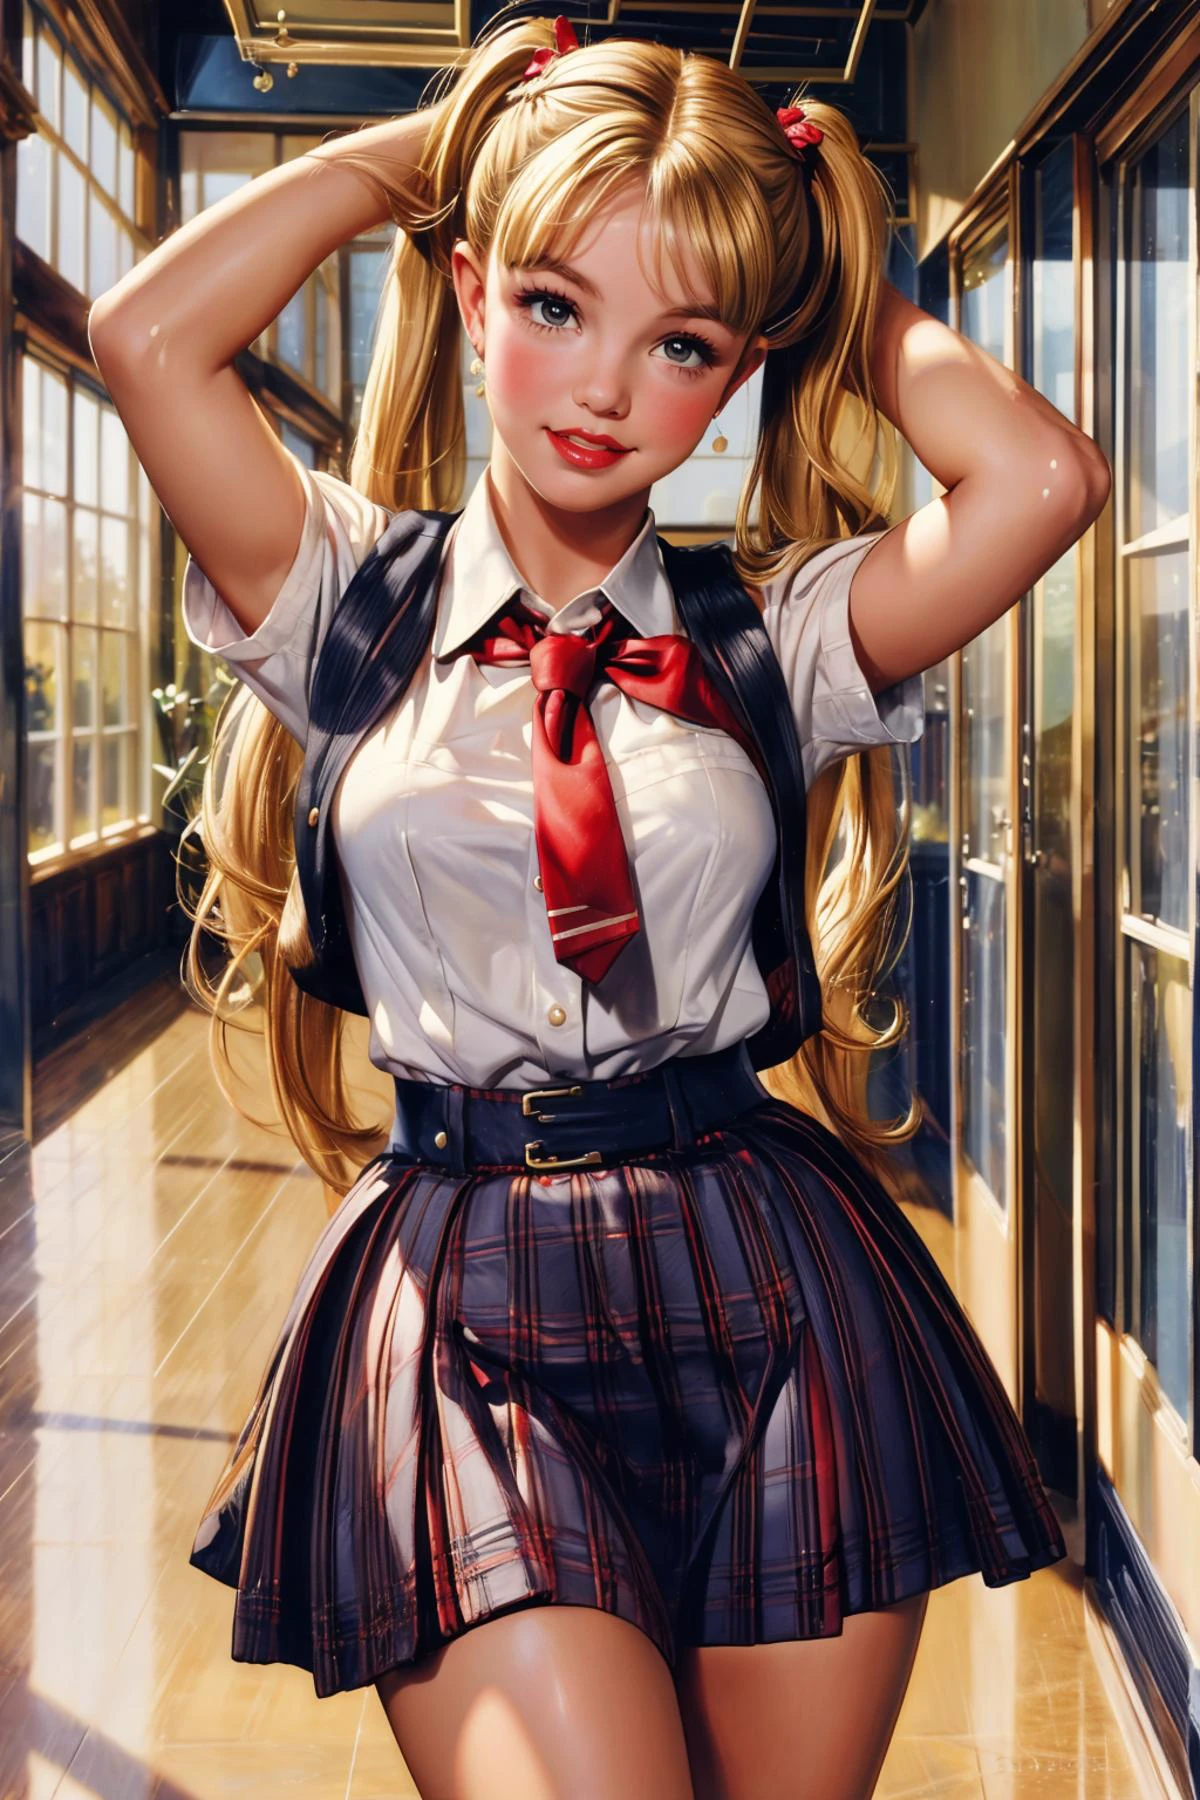 Style Of Gil Elvgren, UHD, HDR, masterpiece, global illumination, [Britney Spears] as a stunningly beautiful student, solo,  uniform, brown eyes, blonde hair, twintails, makeup, school hallway, 90s scenery, indoor school background, adorable, cute, hands behind head posing, britneyspears-smf,
